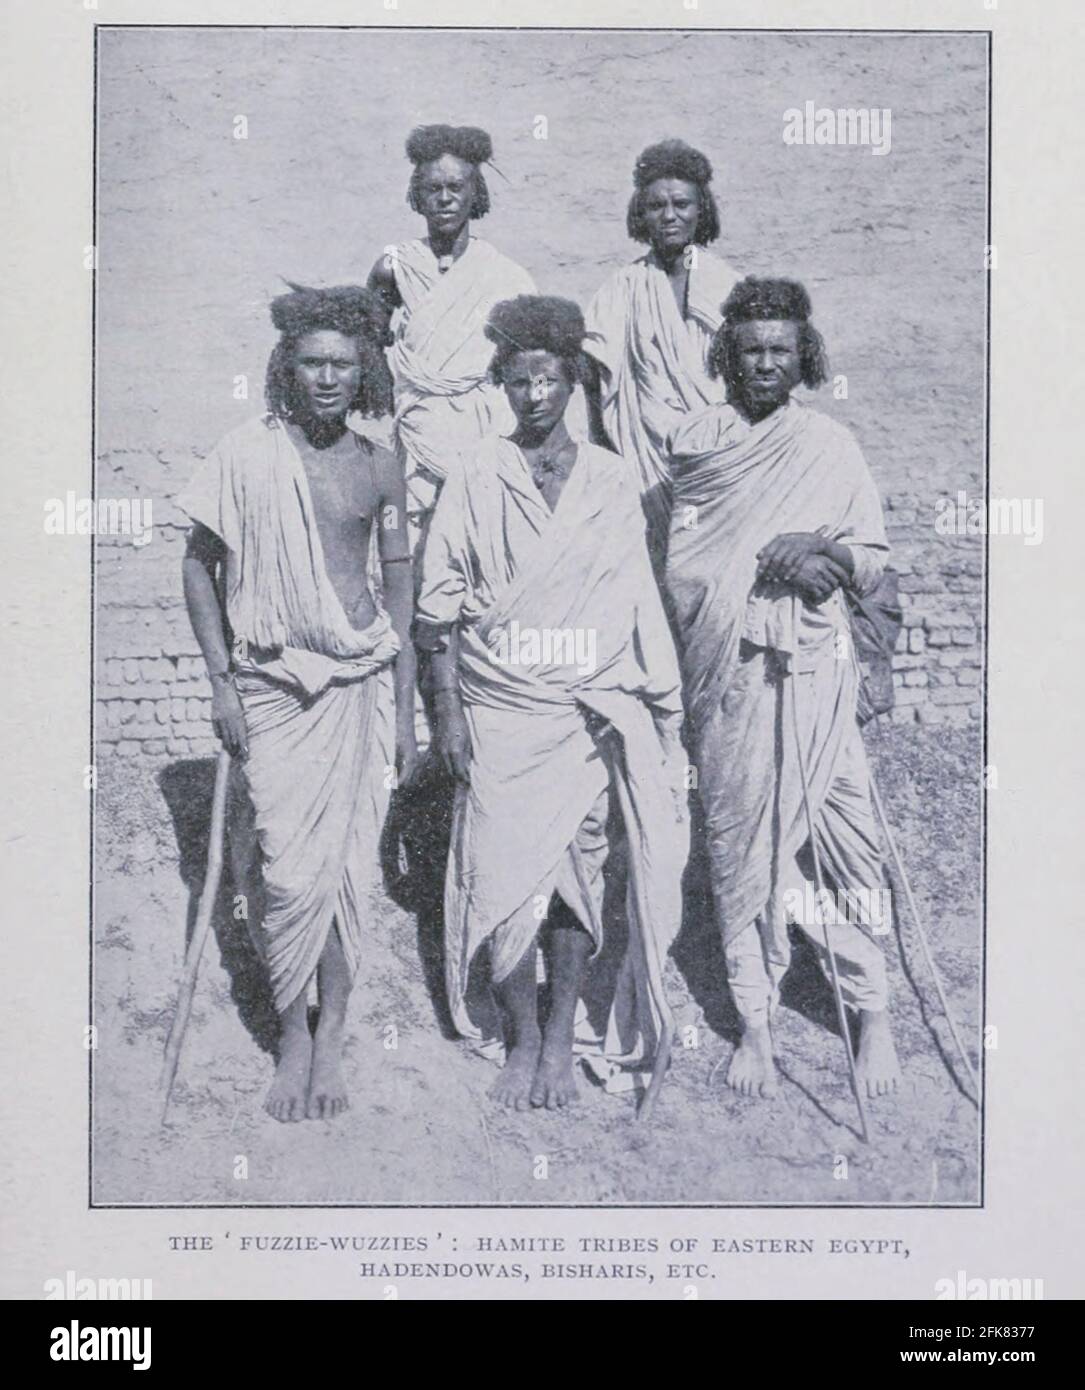 The ' fuzzie wuzzies ' hamite tribes of eastern Egypt Hadendowas, Bisharis, etc ['Fuzzy-Wuzzy' was the term used by British soldiers for Beja warriors who were supporting the Mahdi of Sudan in the Mahdist War. The term relates to the elaborate tiffa hair style favoured by the Hadendoa tribe, a subdivision of the Beja people. ] From the Book '  Britain across the seas : Africa : a history and description of the British Empire in Africa ' by Johnston, Harry Hamilton, Sir, 1858-1927 Published in 1910 in London by National Society's Depository Stock Photo